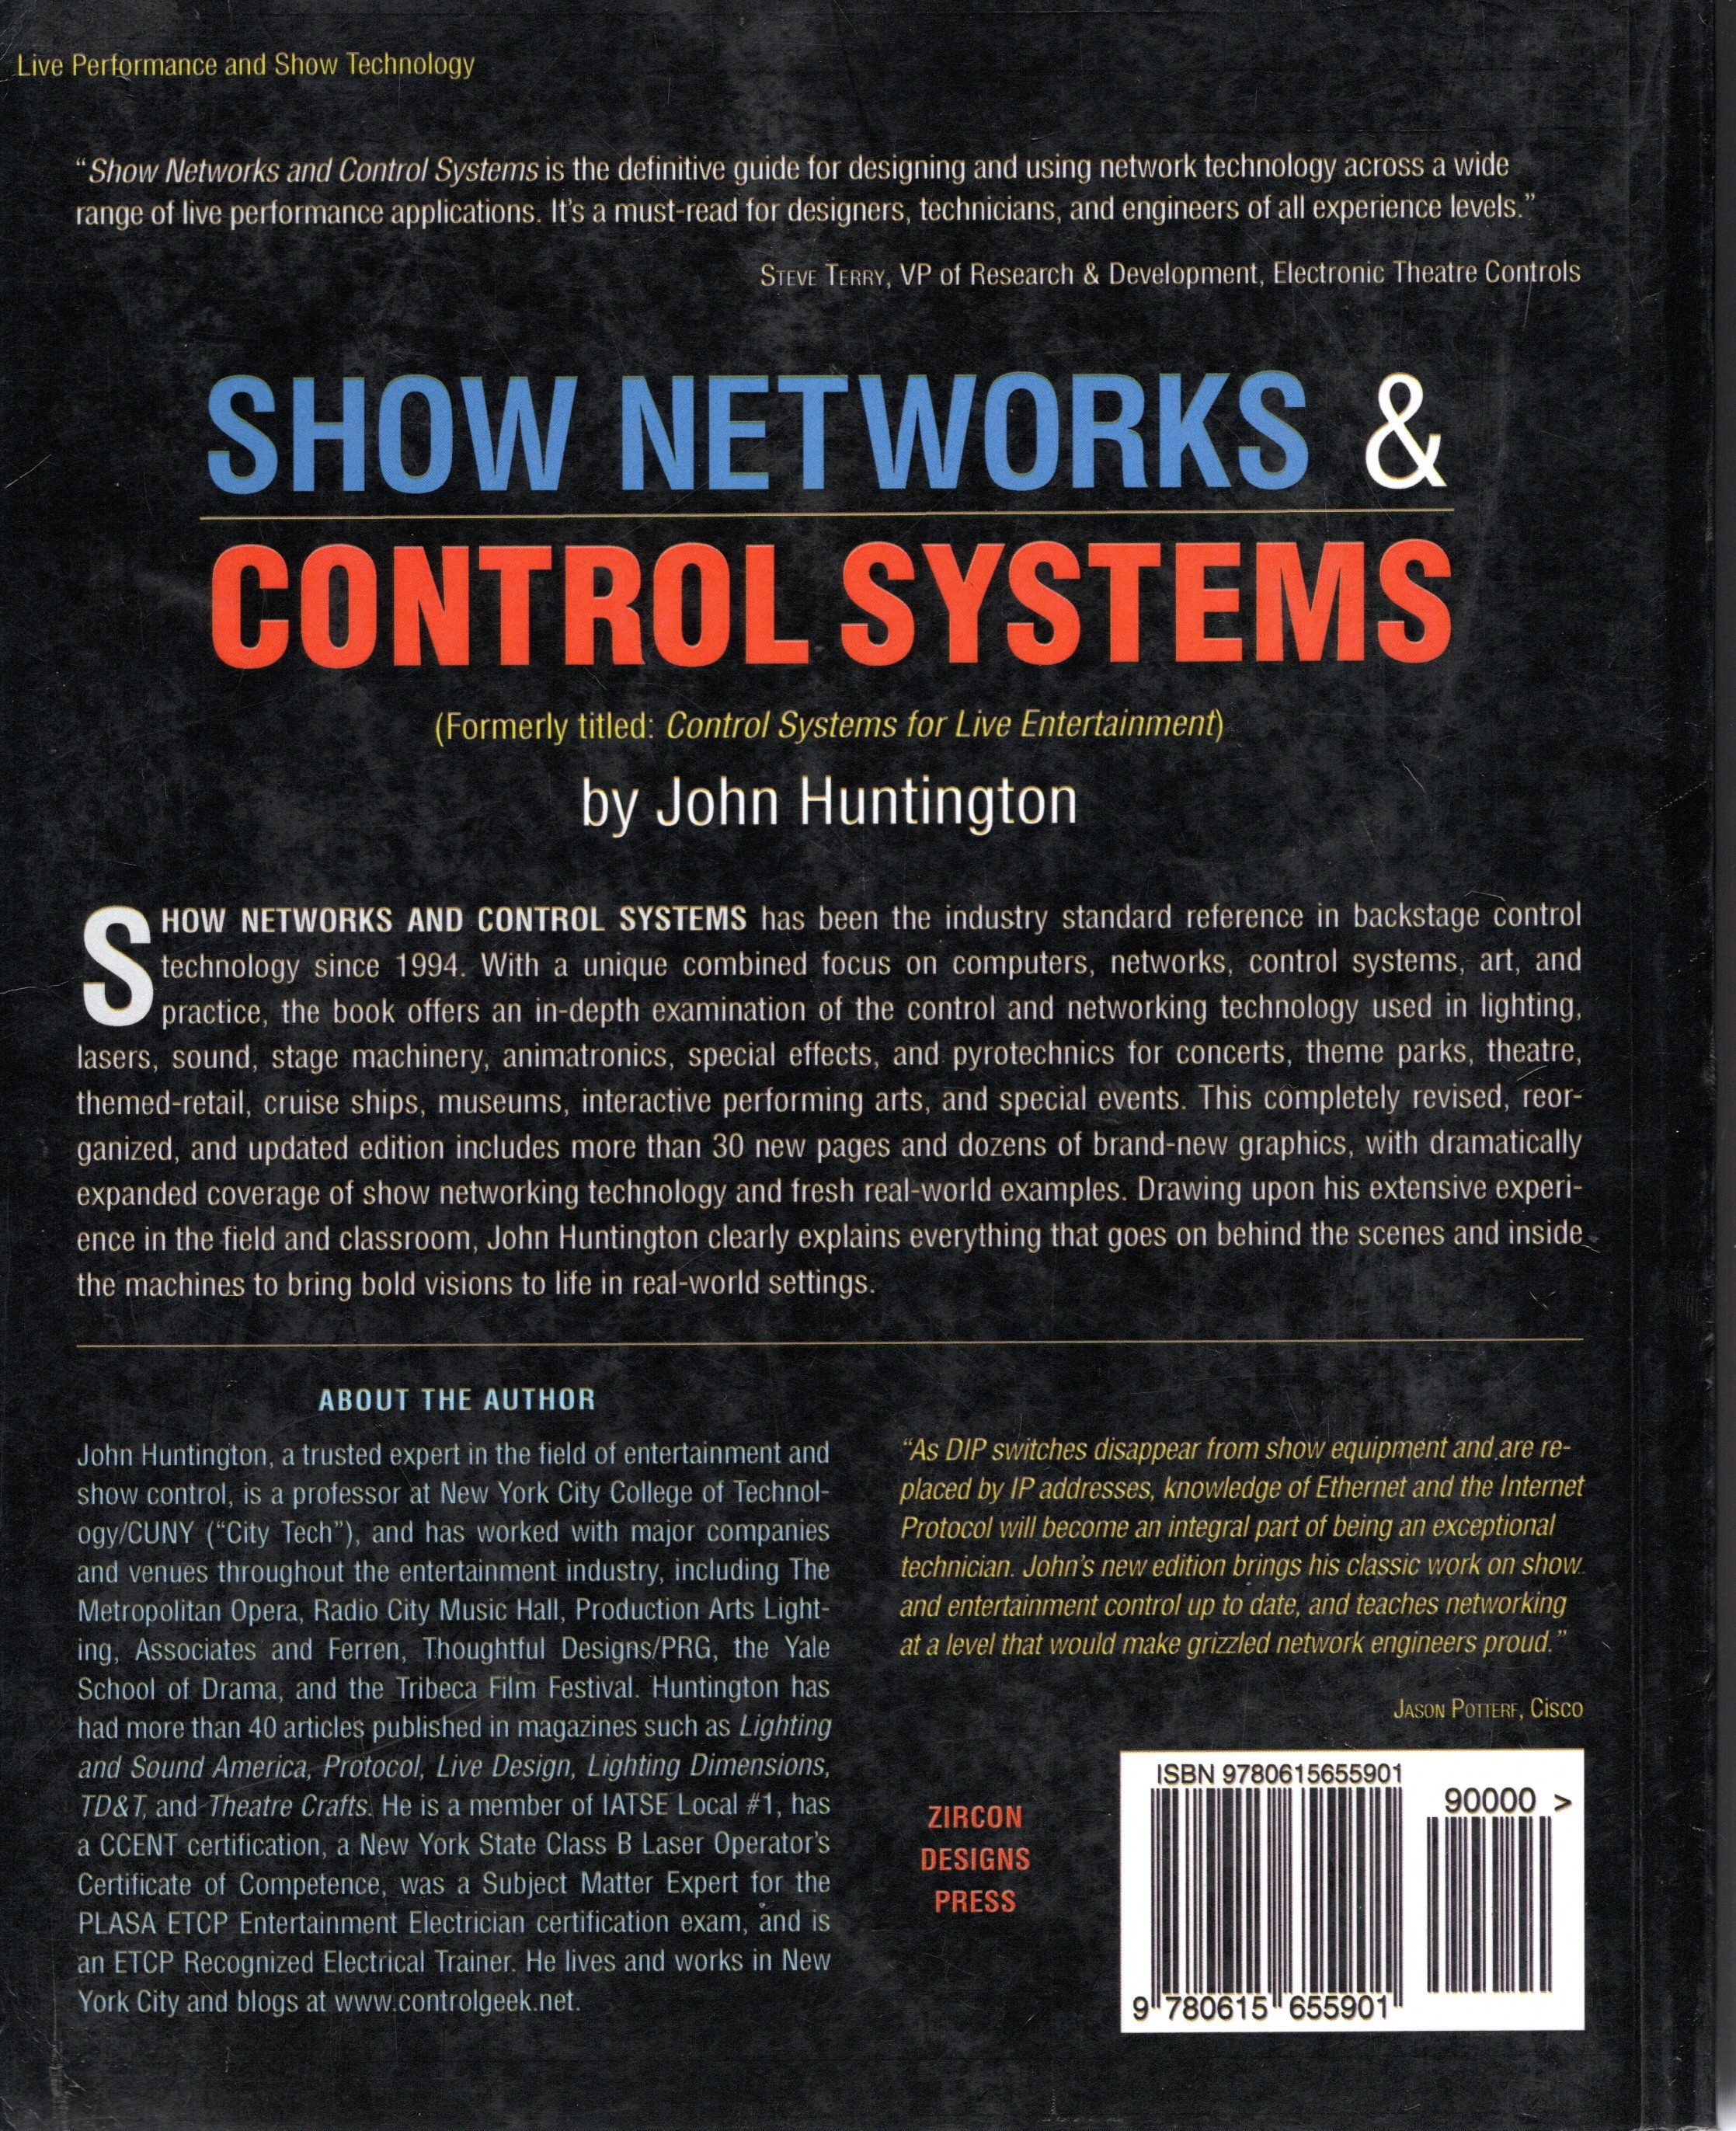 ShowNetworksAndControlySystems2012BackCover-Scanned.jpg